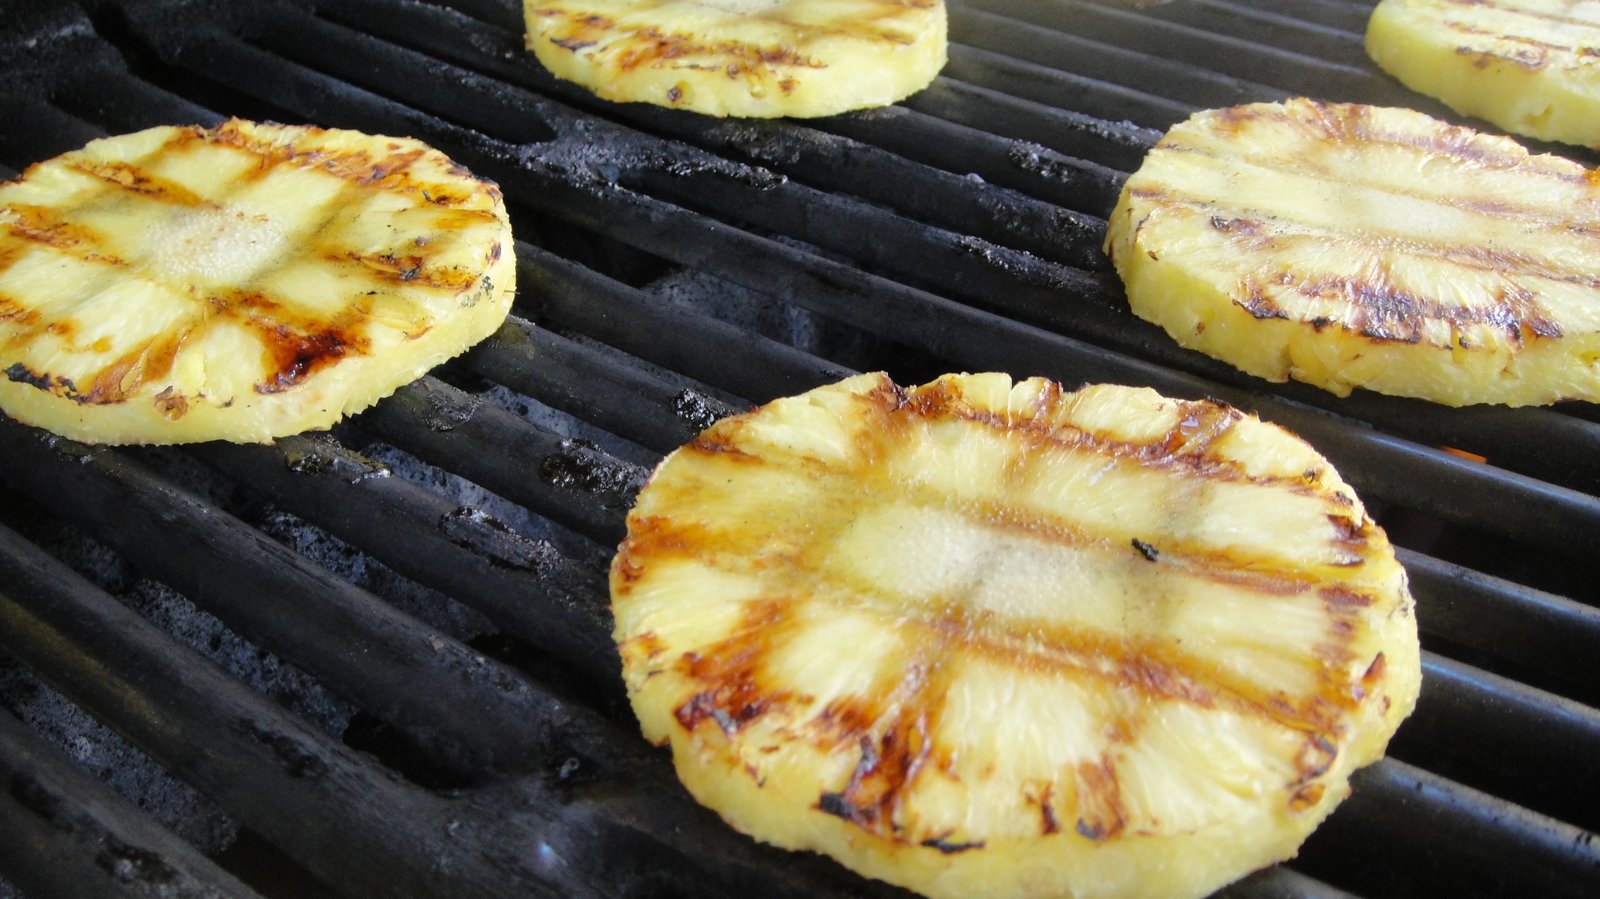 Recipe #90 | Grilled Pineapple Mint Salad